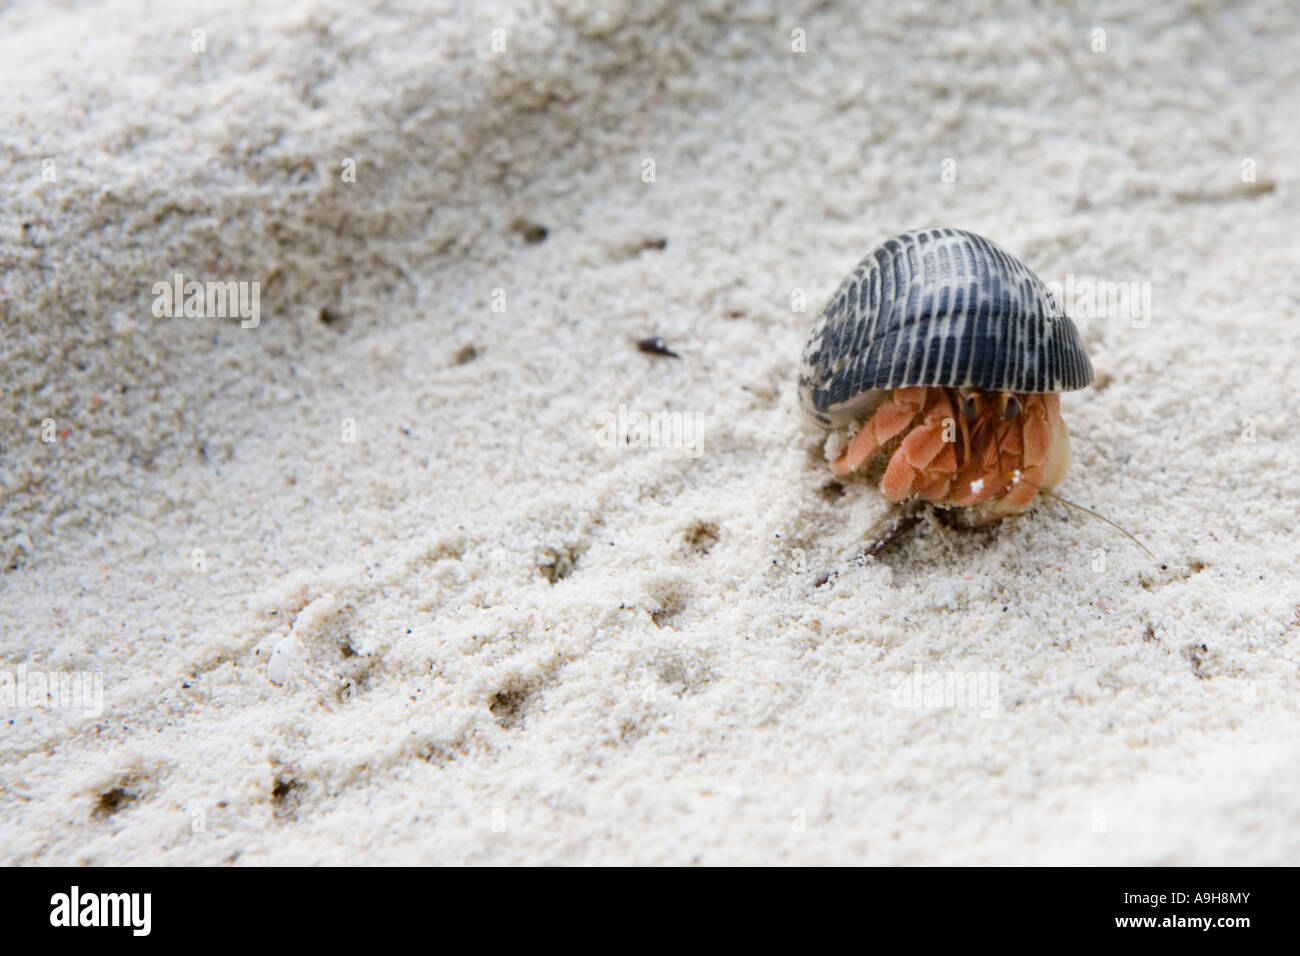 A hermit crab running across a white sand beach in The Maldives Stock Photo